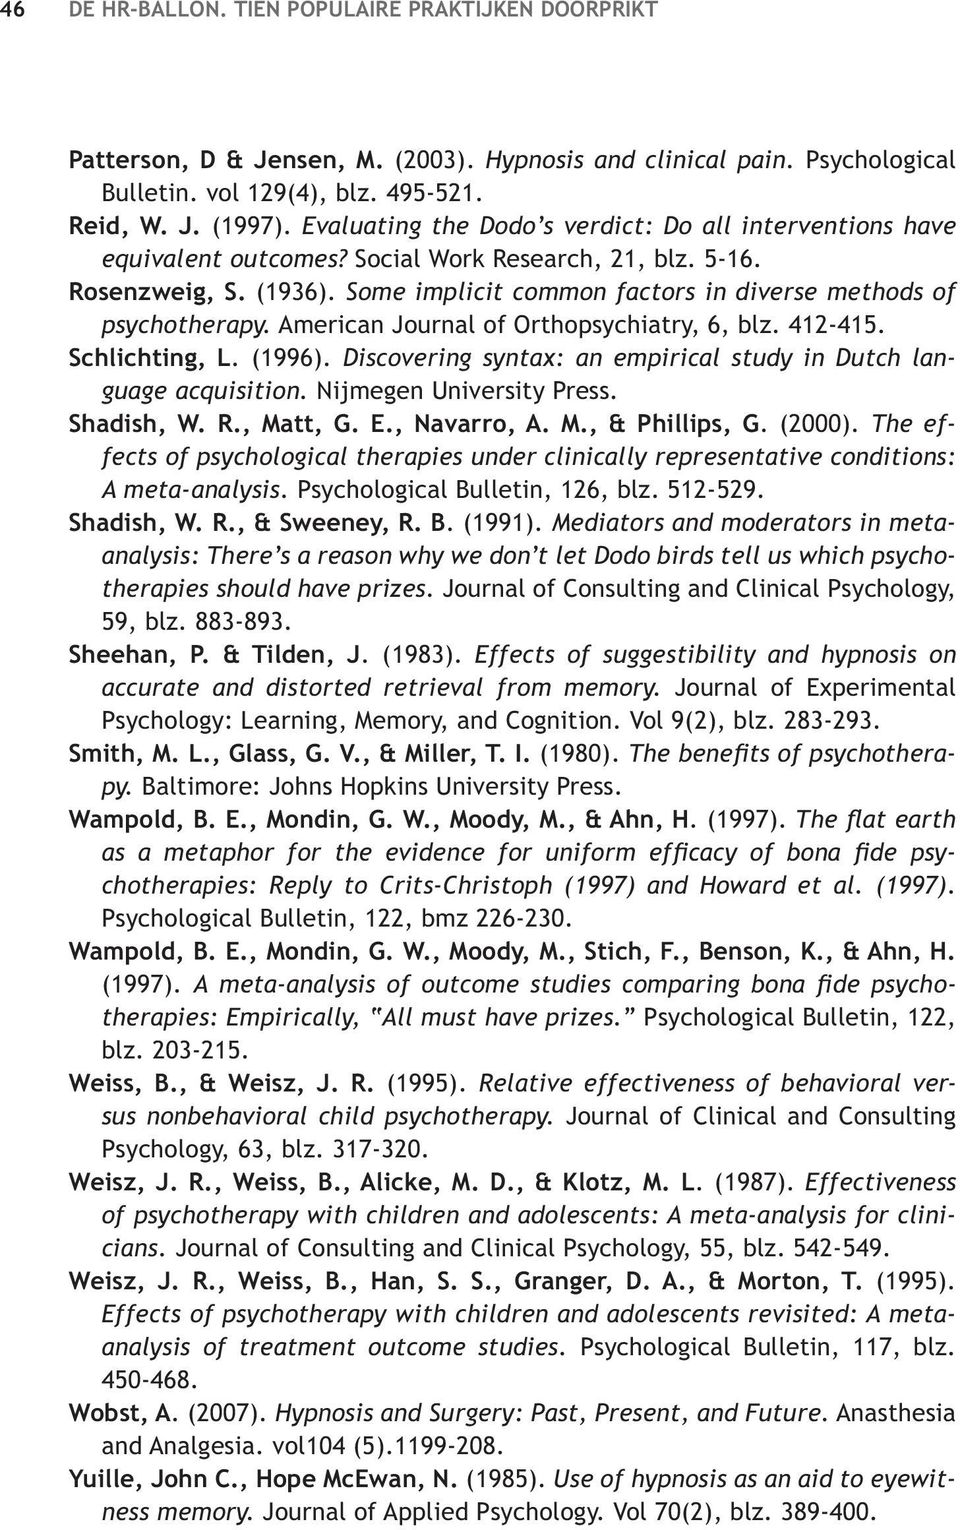 Some implicit common factors in diverse methods of psychotherapy. American Journal of Orthopsychiatry, 6, blz. 412-415. Schlichting, L. (1996). guage acquisition. Nijmegen University Press.